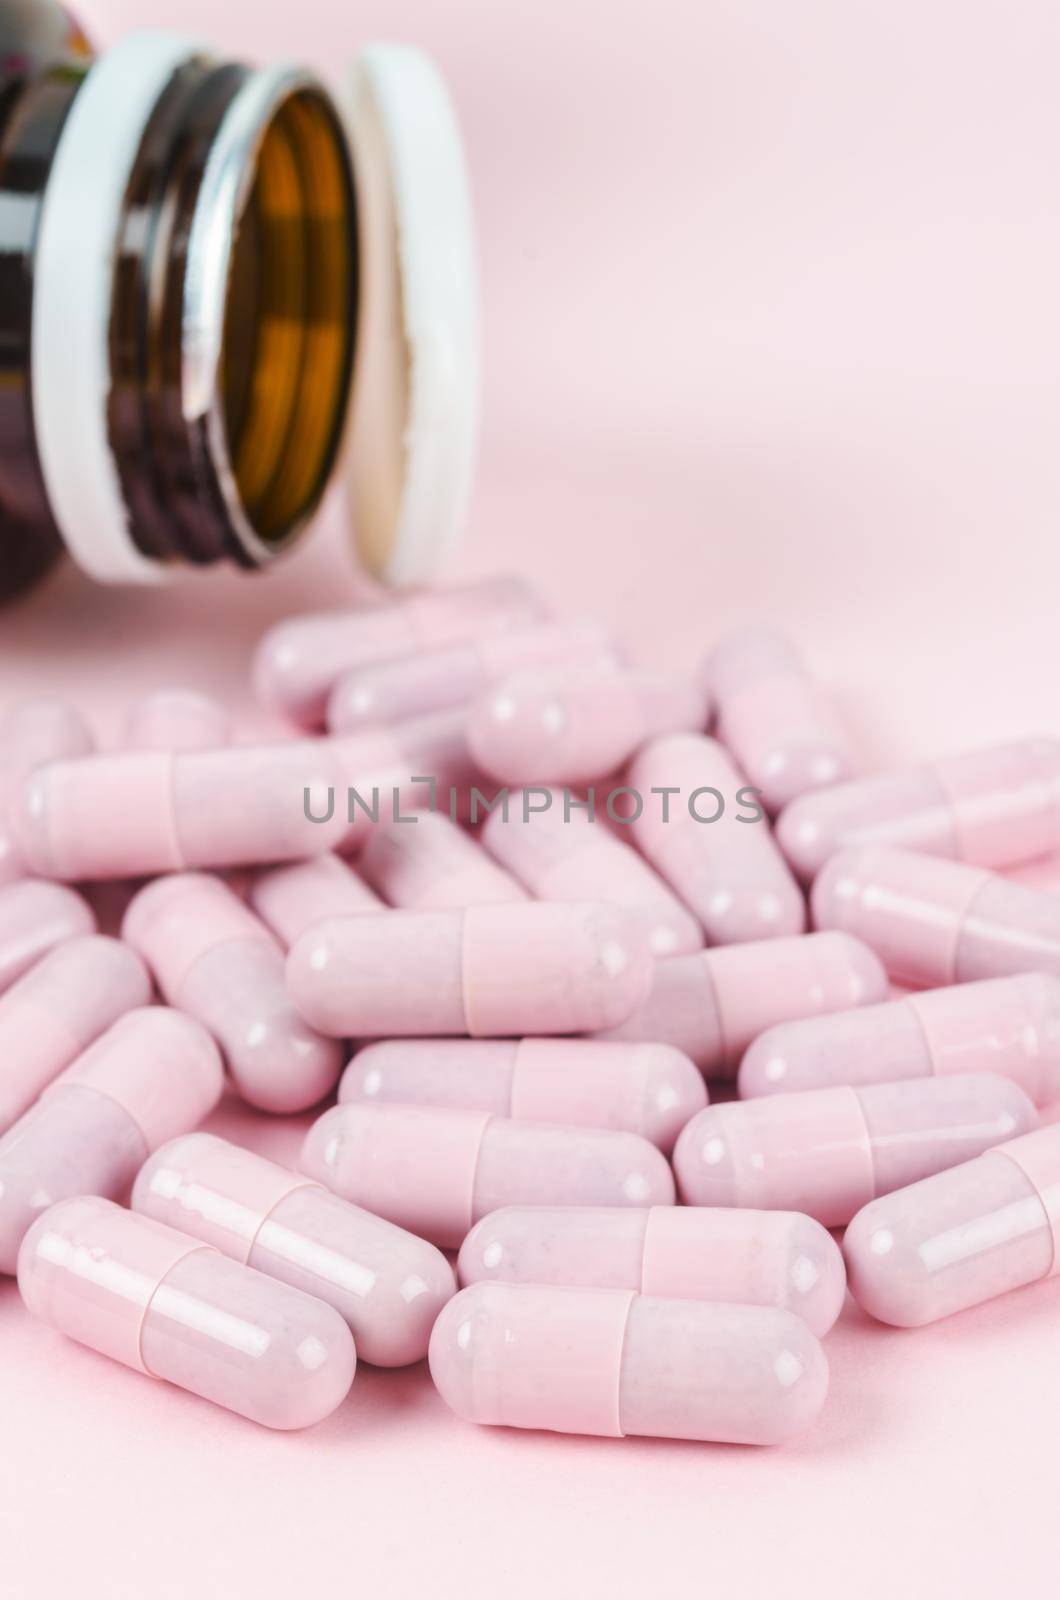 Pink capsule pills with bottle by Gamjai